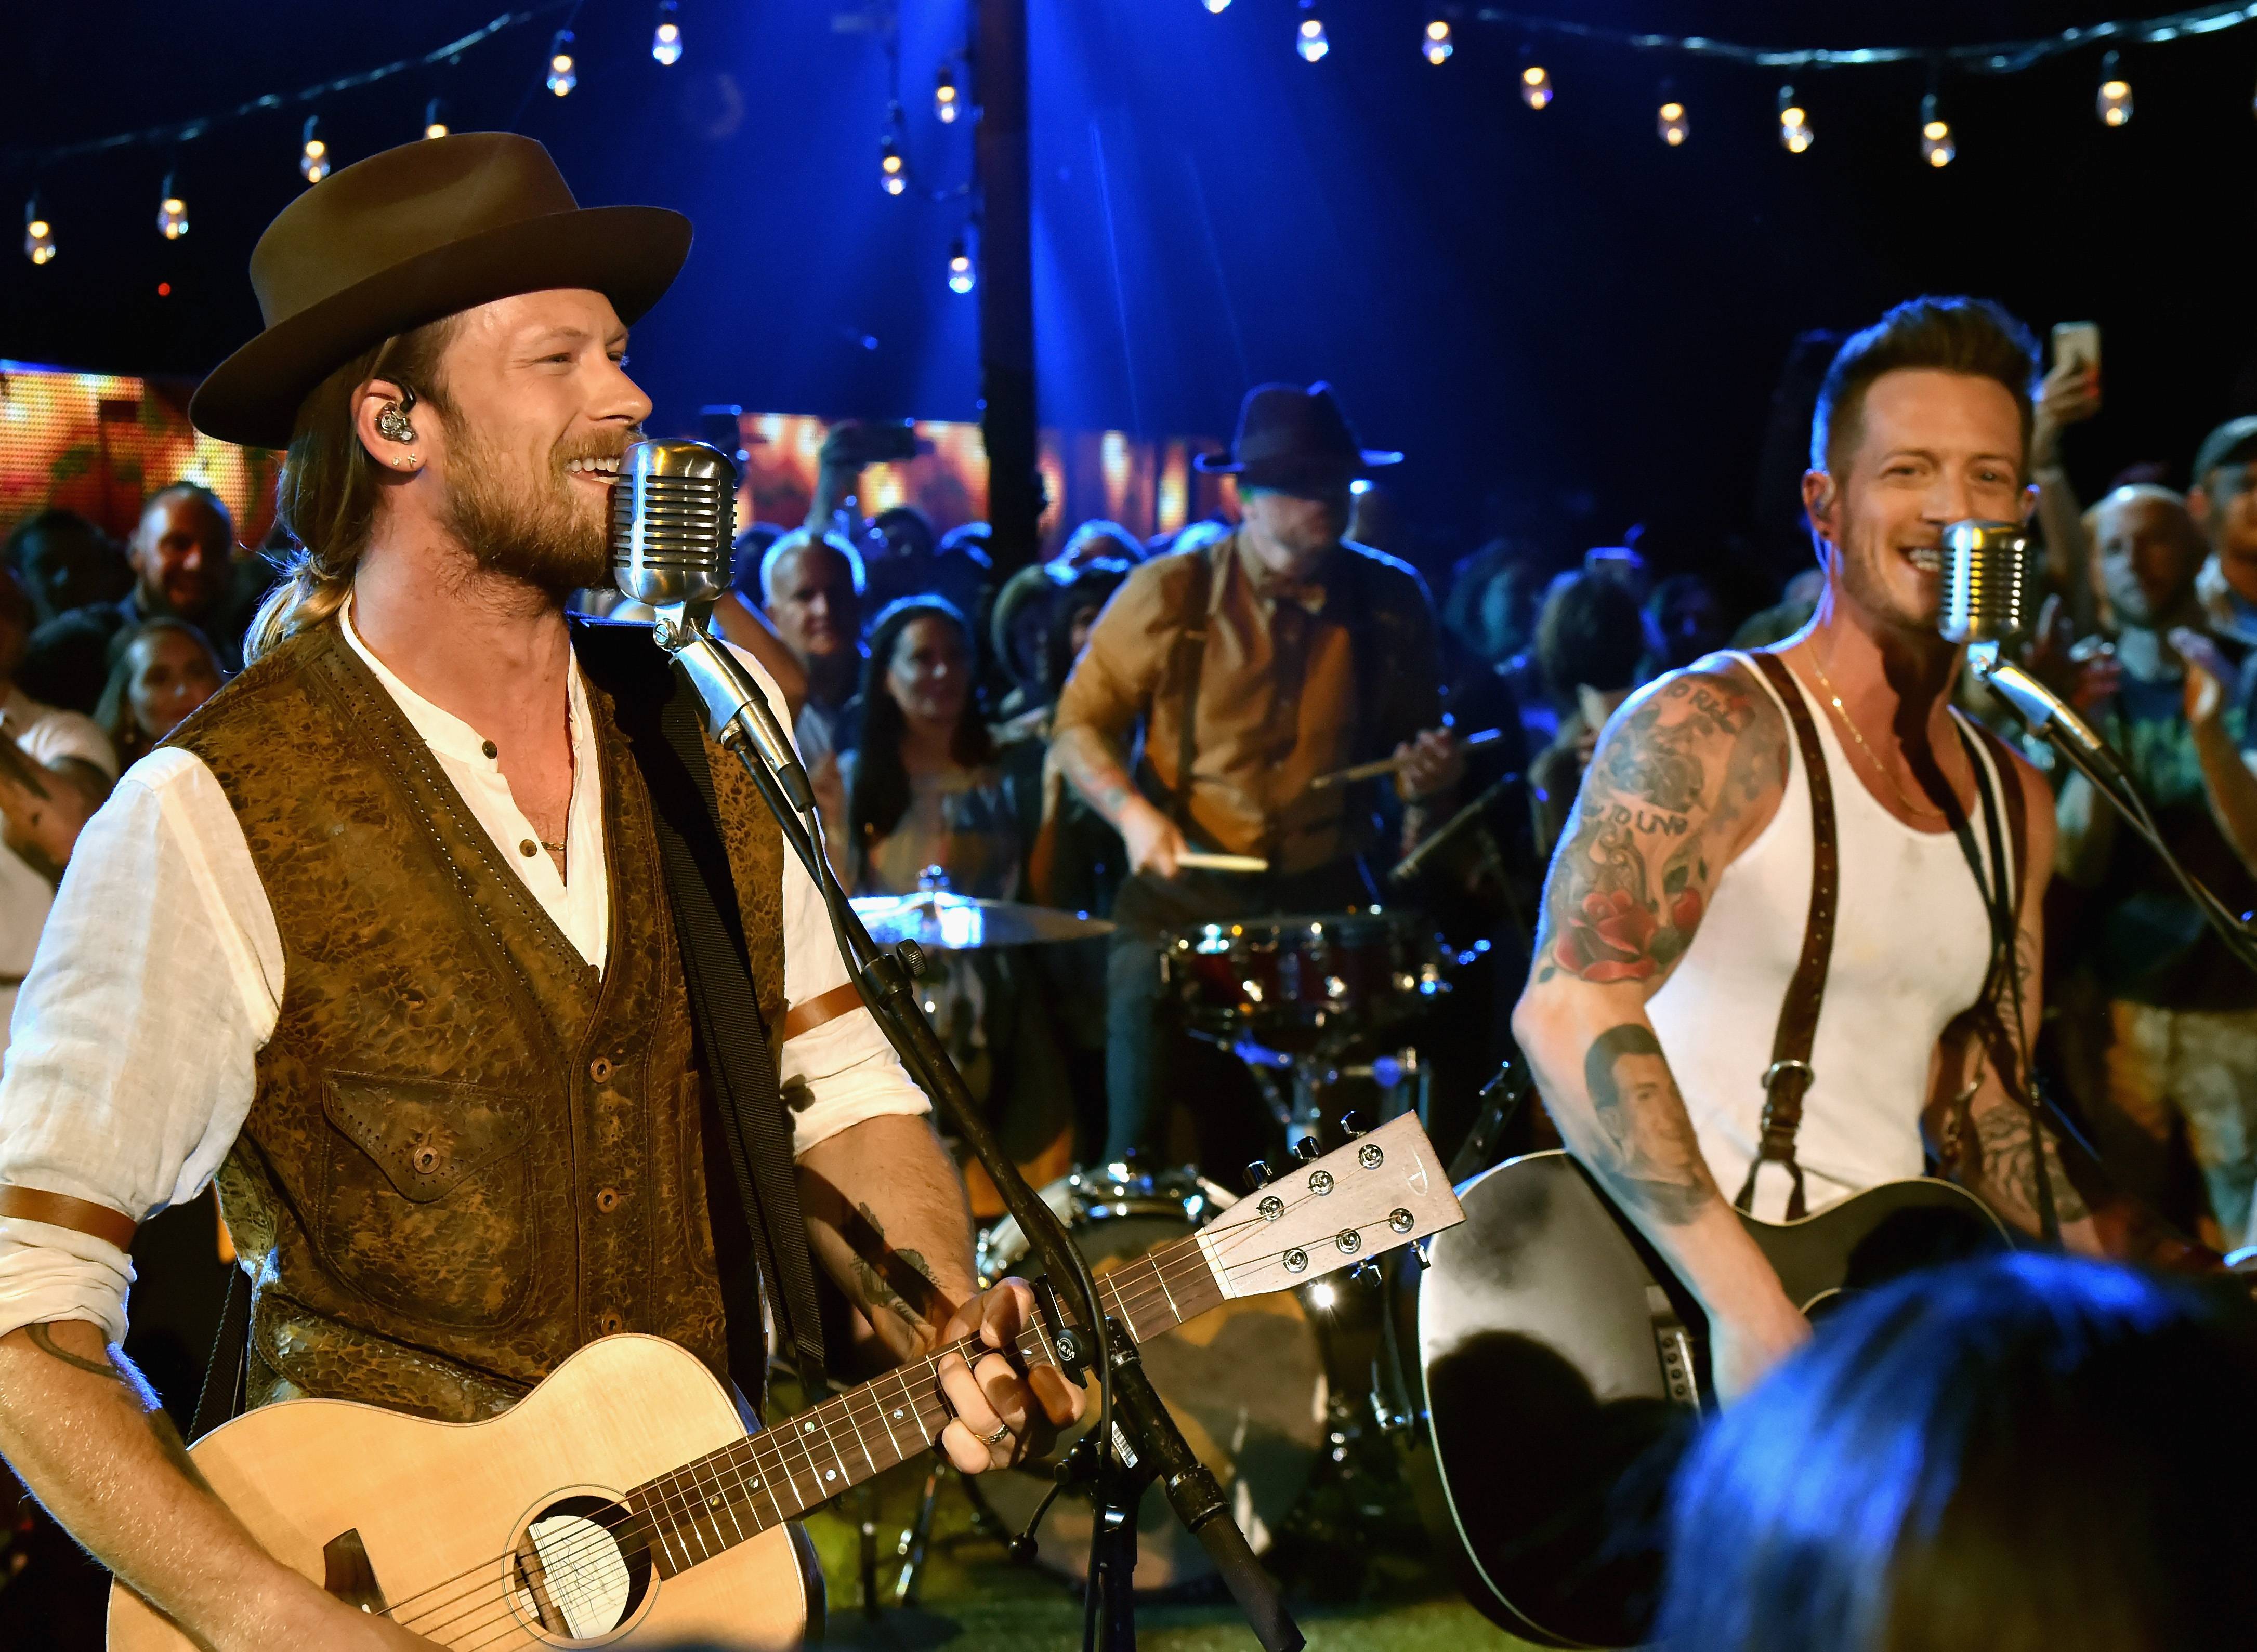 CMTawards: Florida Georgia Line's Roots Show with “Simple” | News | CMT